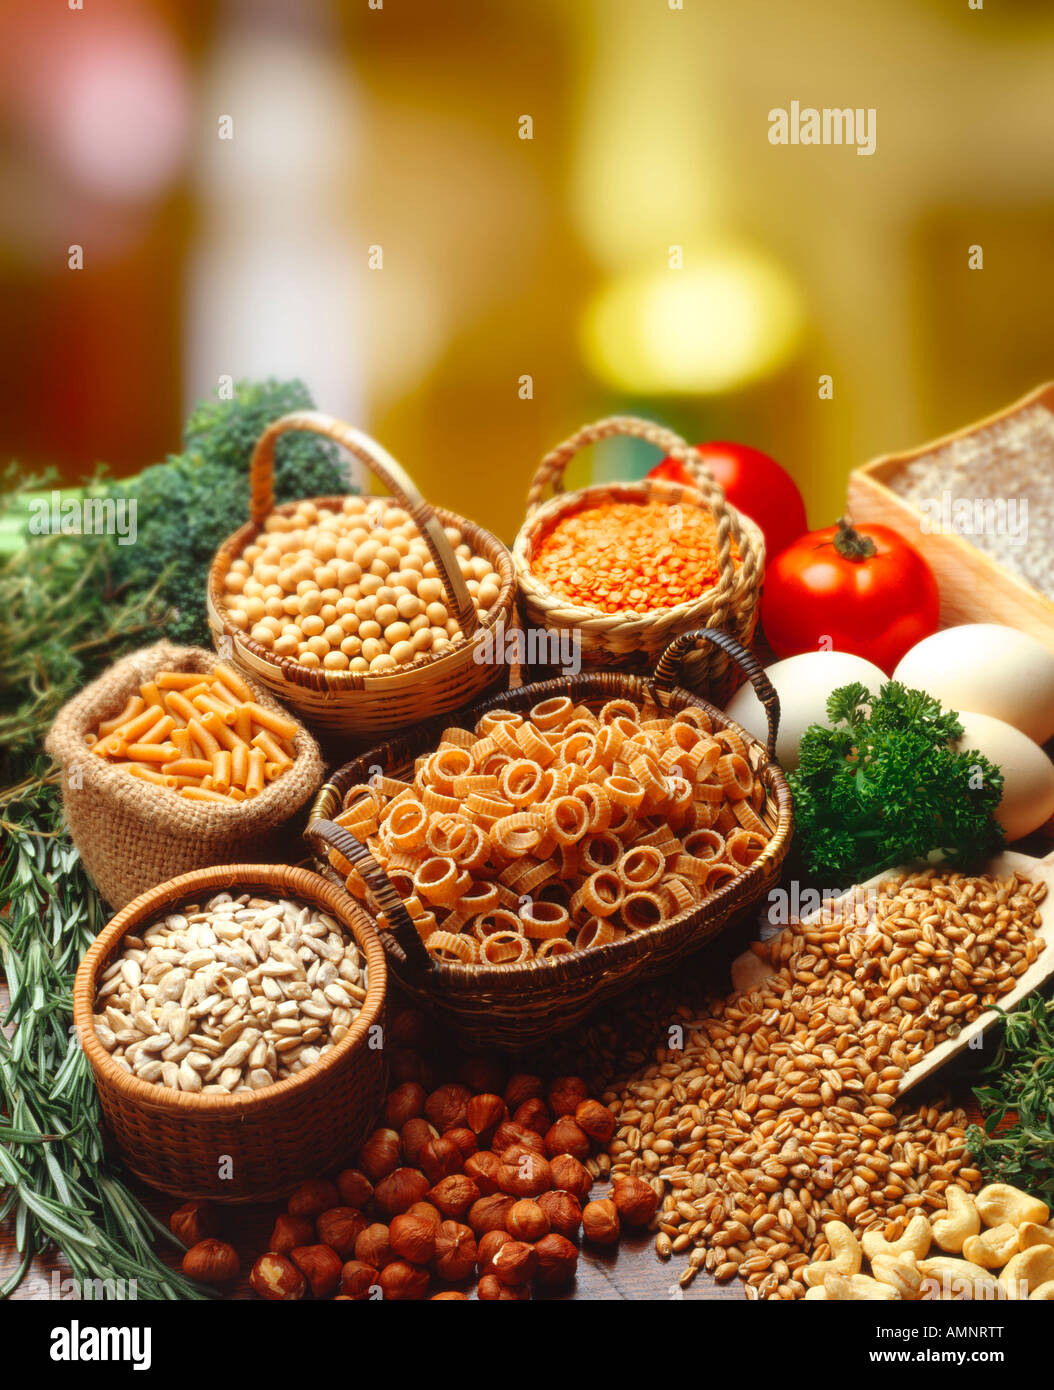 Organic  wholefoods, pulses, beans and nuts in baskets and wooden spoons. Organic foods. Stock Photo